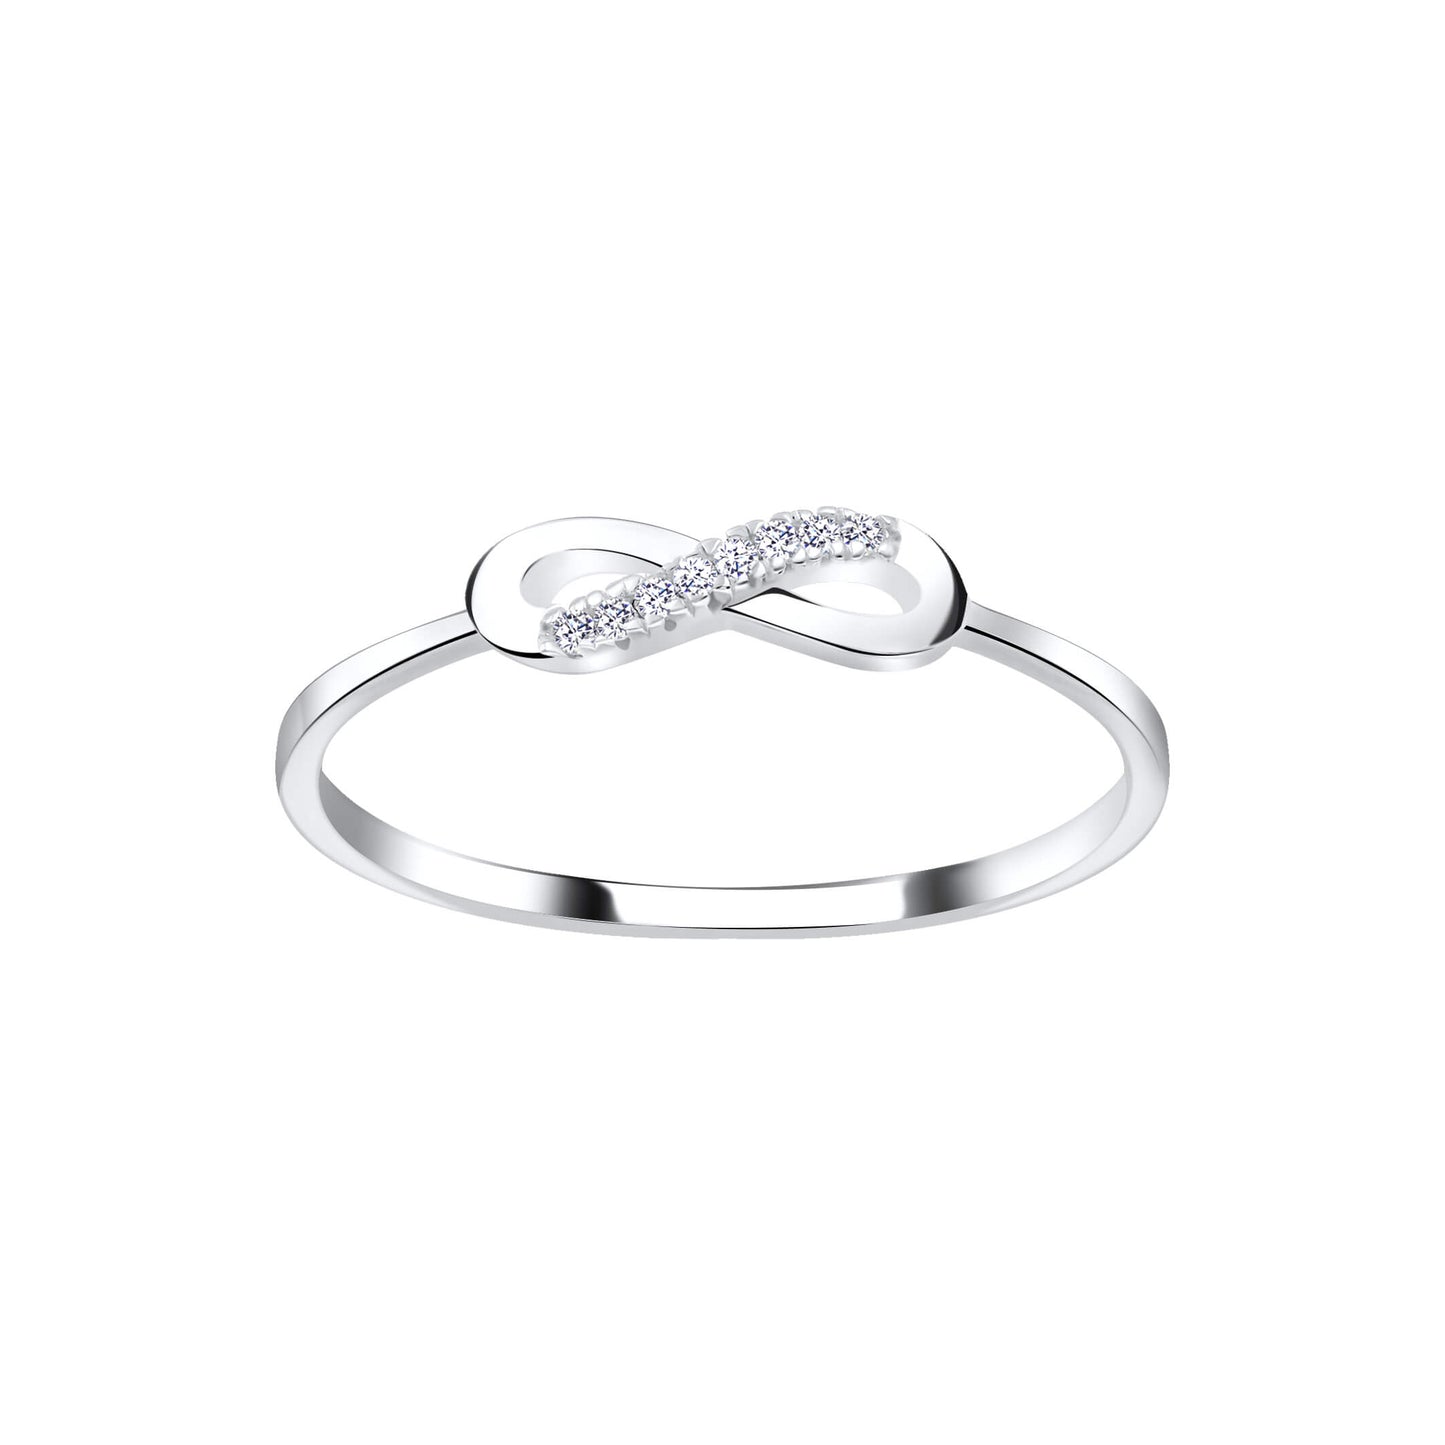 Sterling Silver CZ Infinity Ring